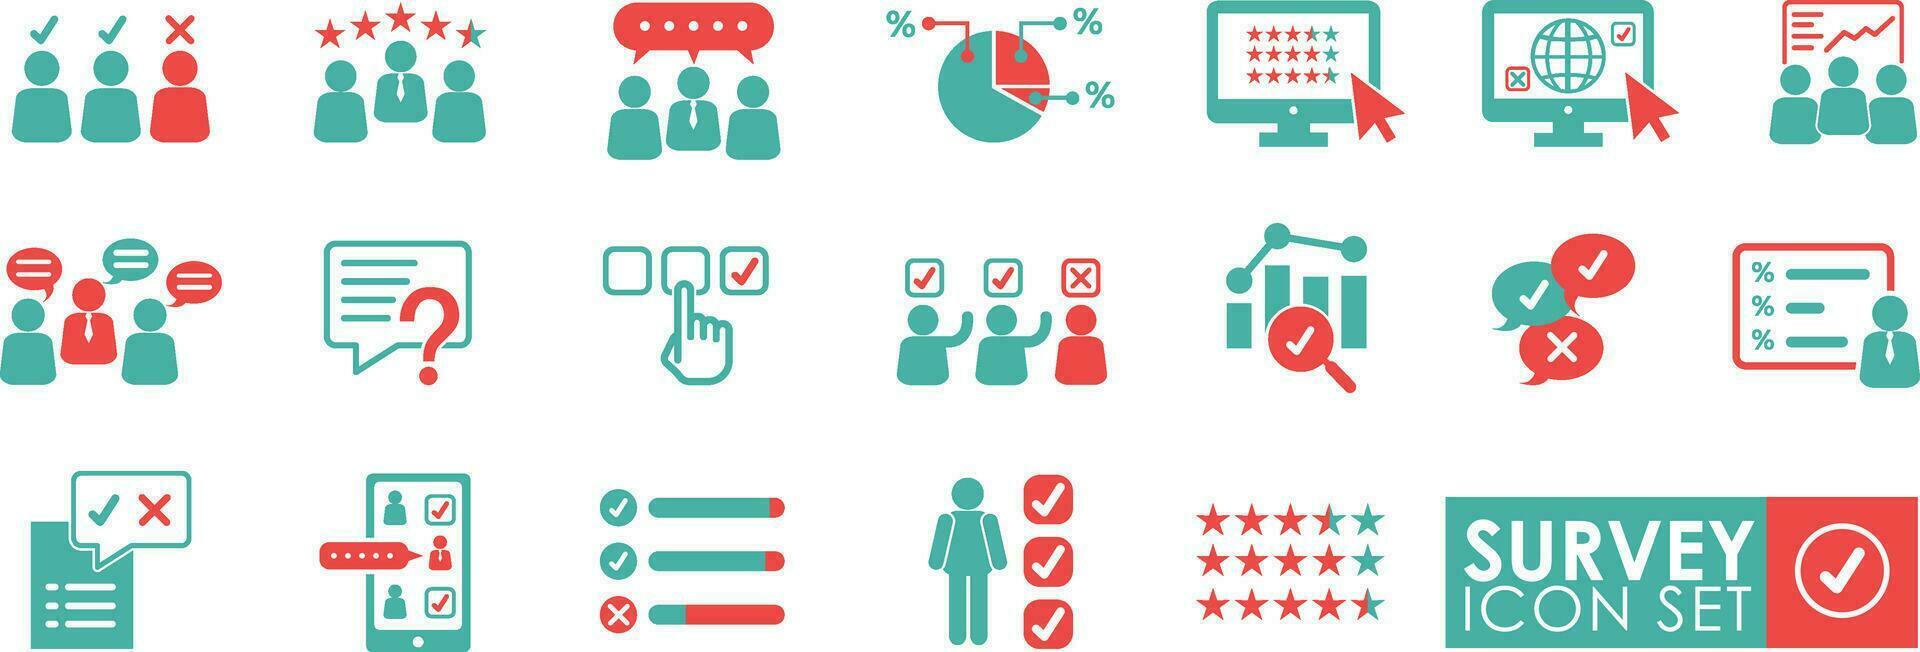 Survey icon set. Feedback, opinions, questionnaire, poll, research, data collection, review, and satisfaction icons. Vector illustration. Solid icon collection.